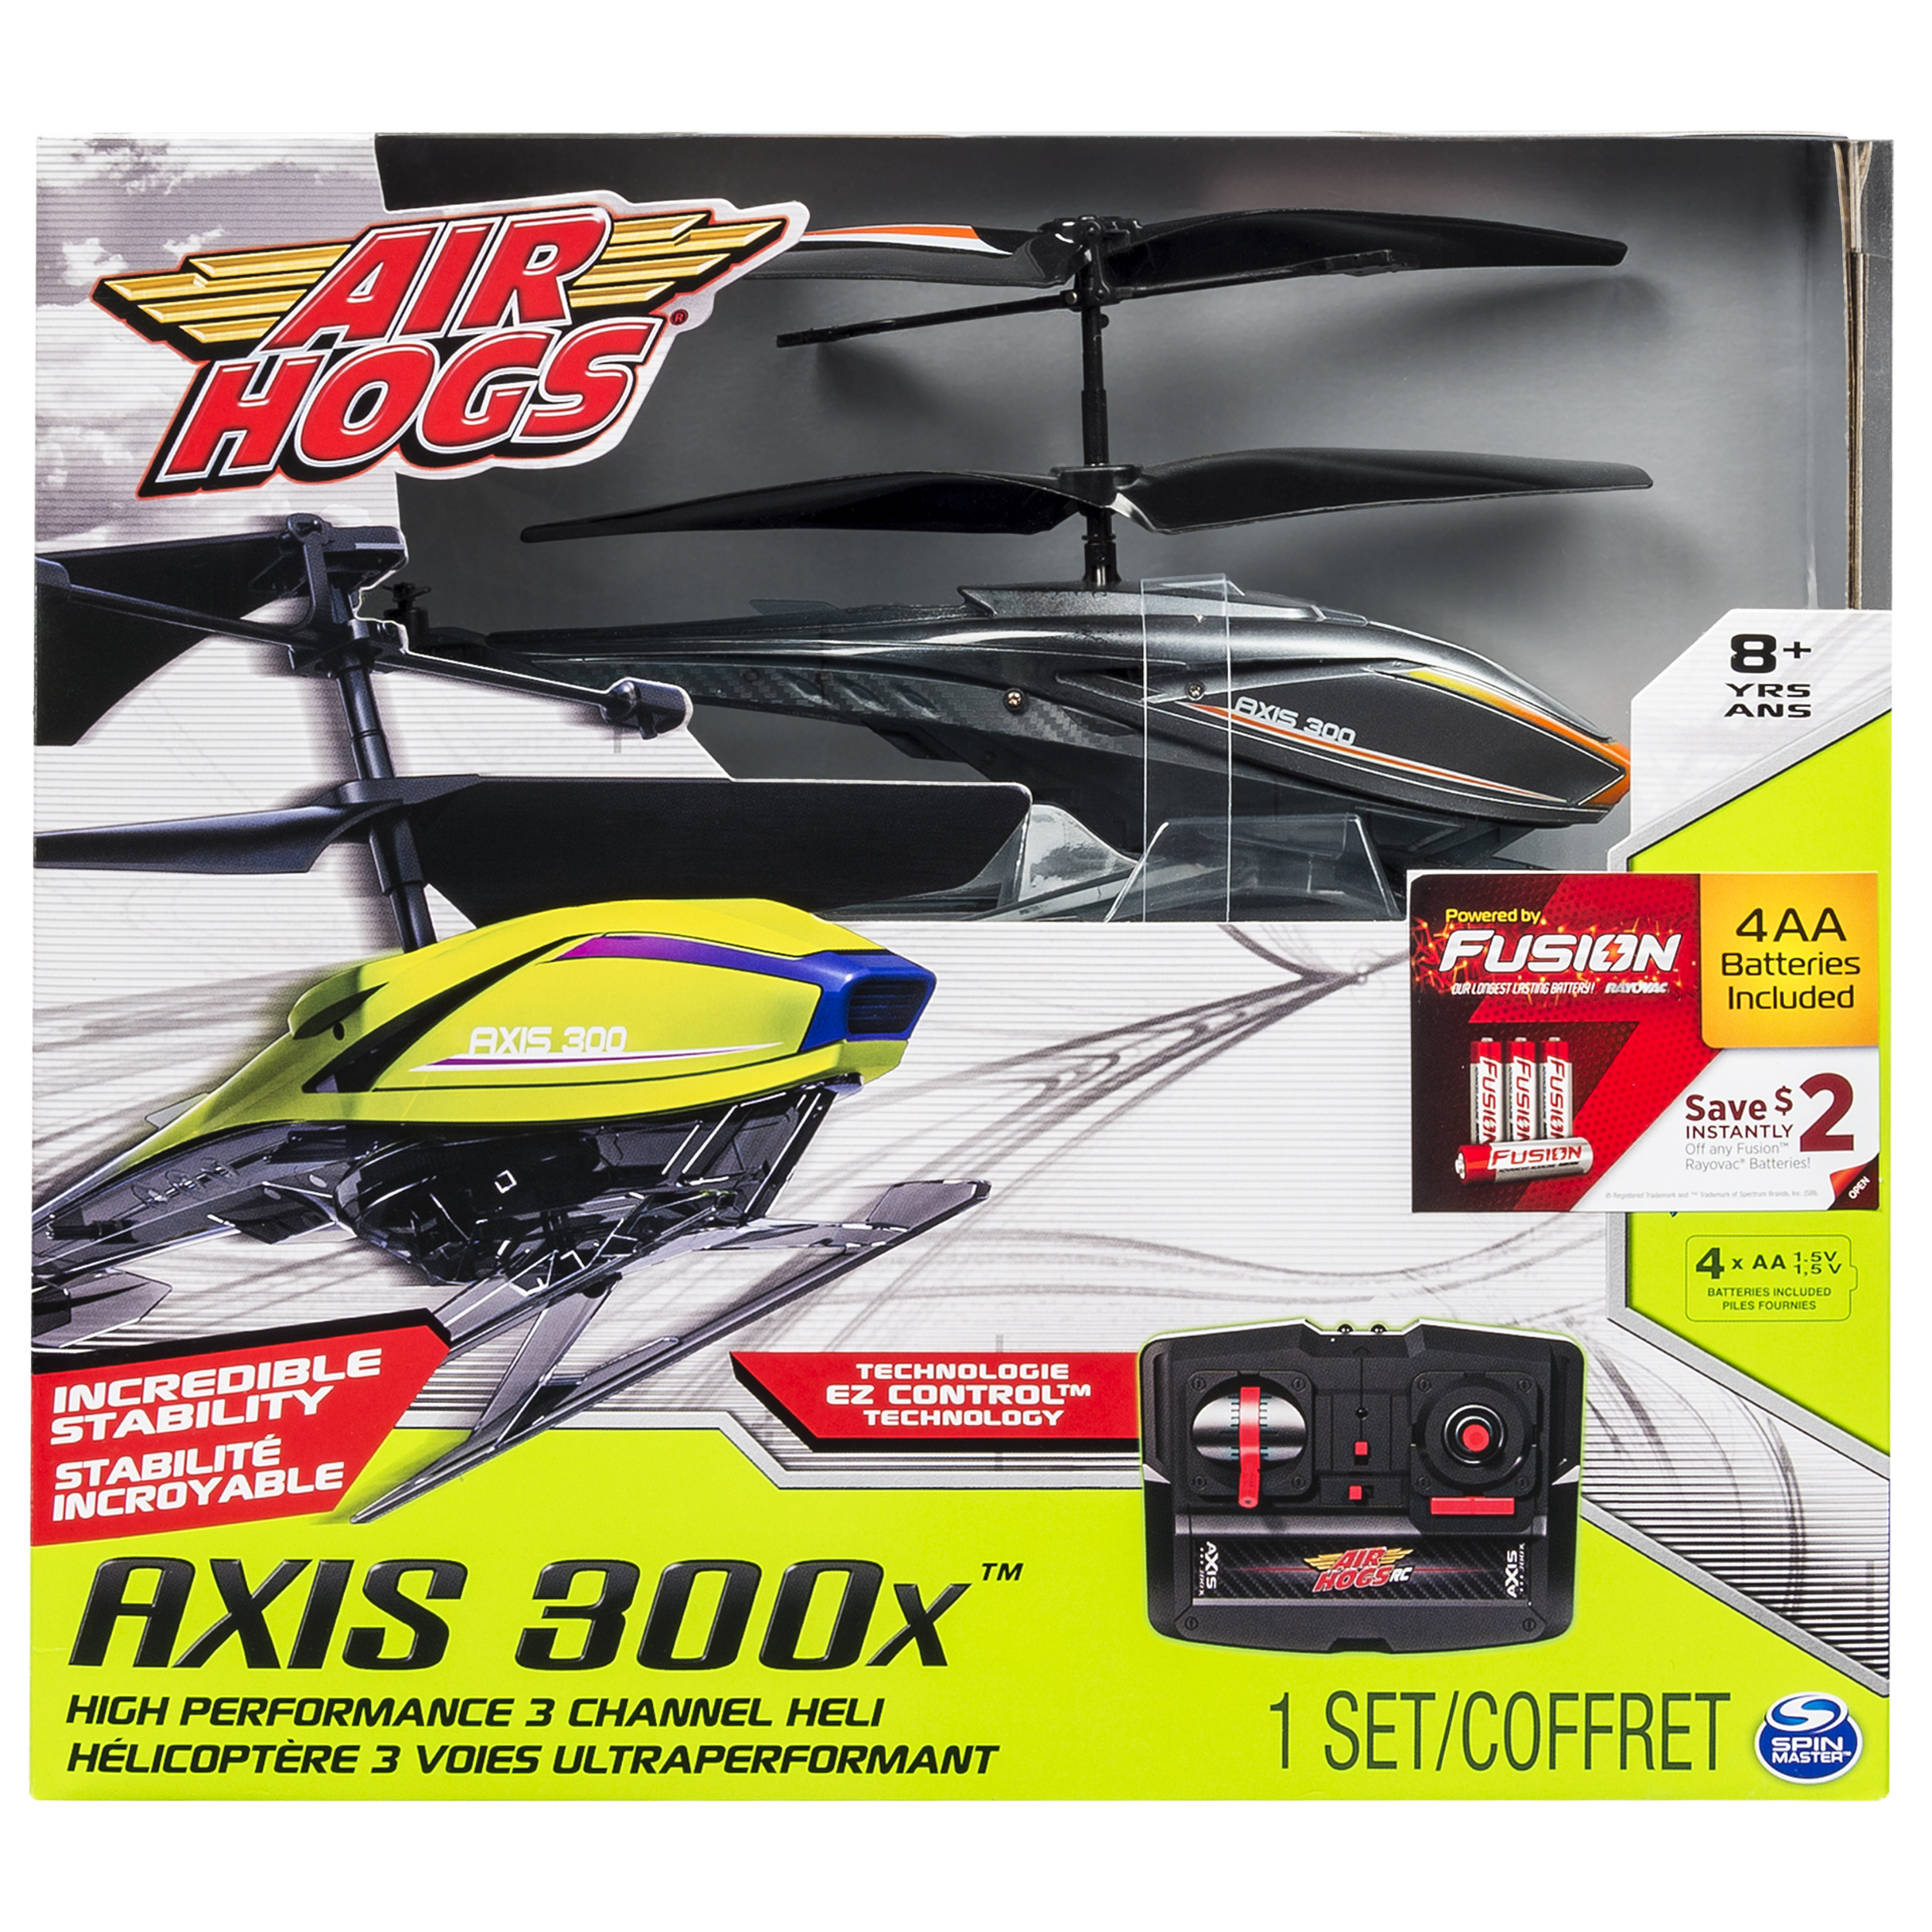 Air Hogs RC Axis 300X, Gray R/C Helicopter with Batteries - image 2 of 6